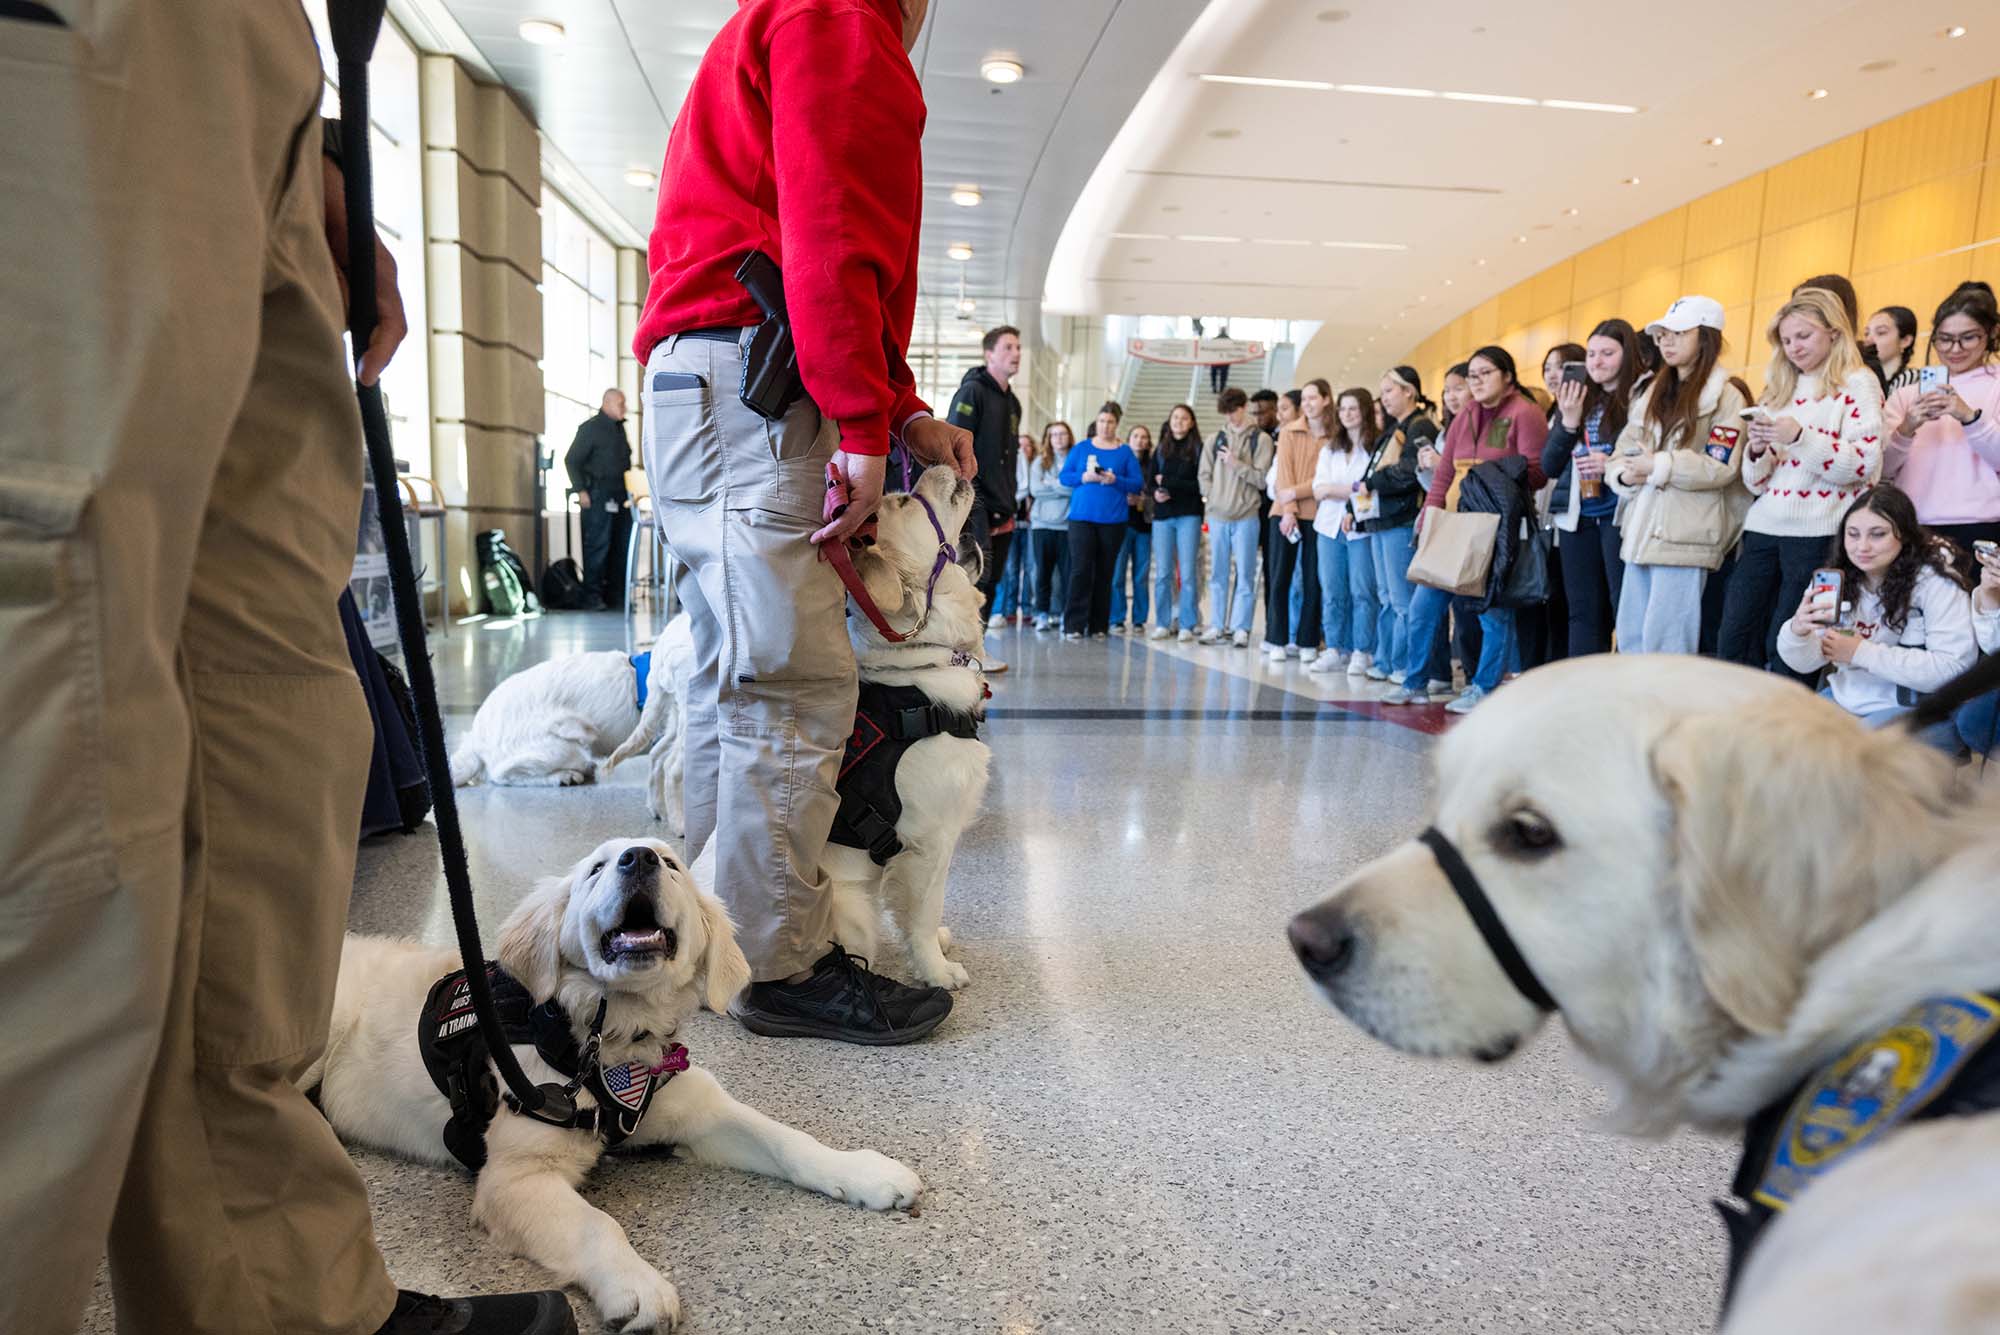 Photo: A picture of many puppies and their handlers at an event with students